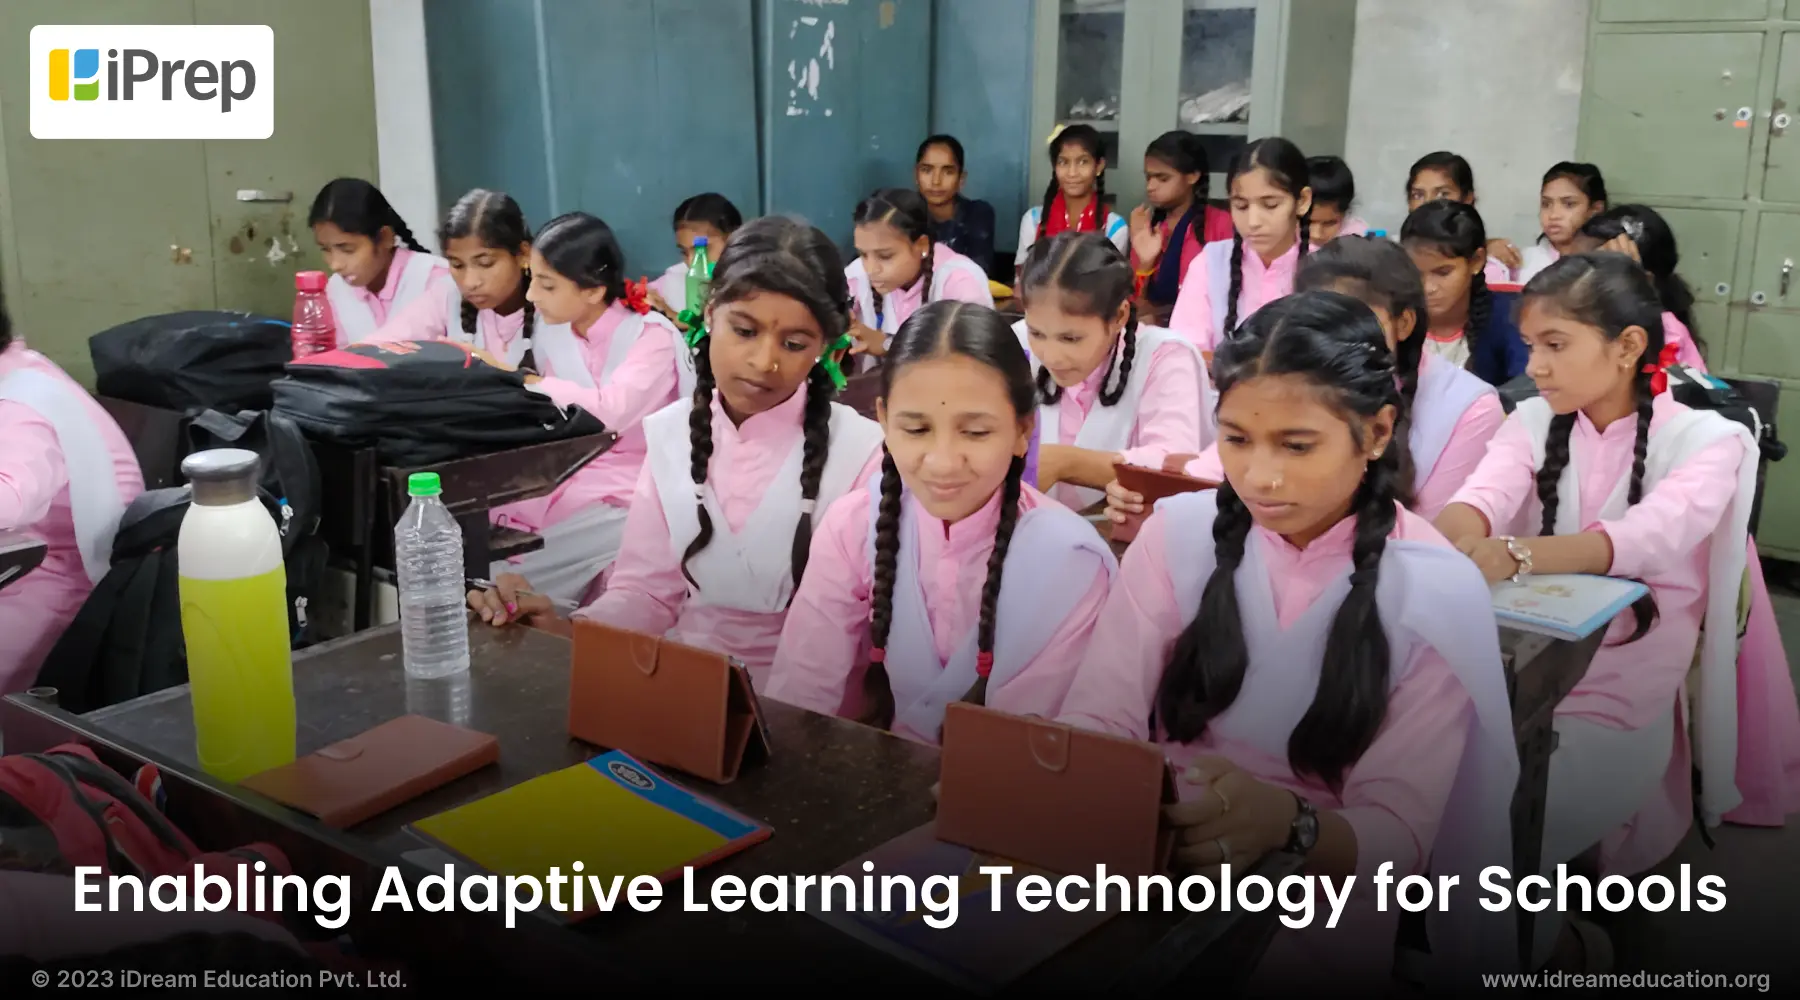 A visual showing Students engaging with personalized adaptive learning technology for schools on tablets.